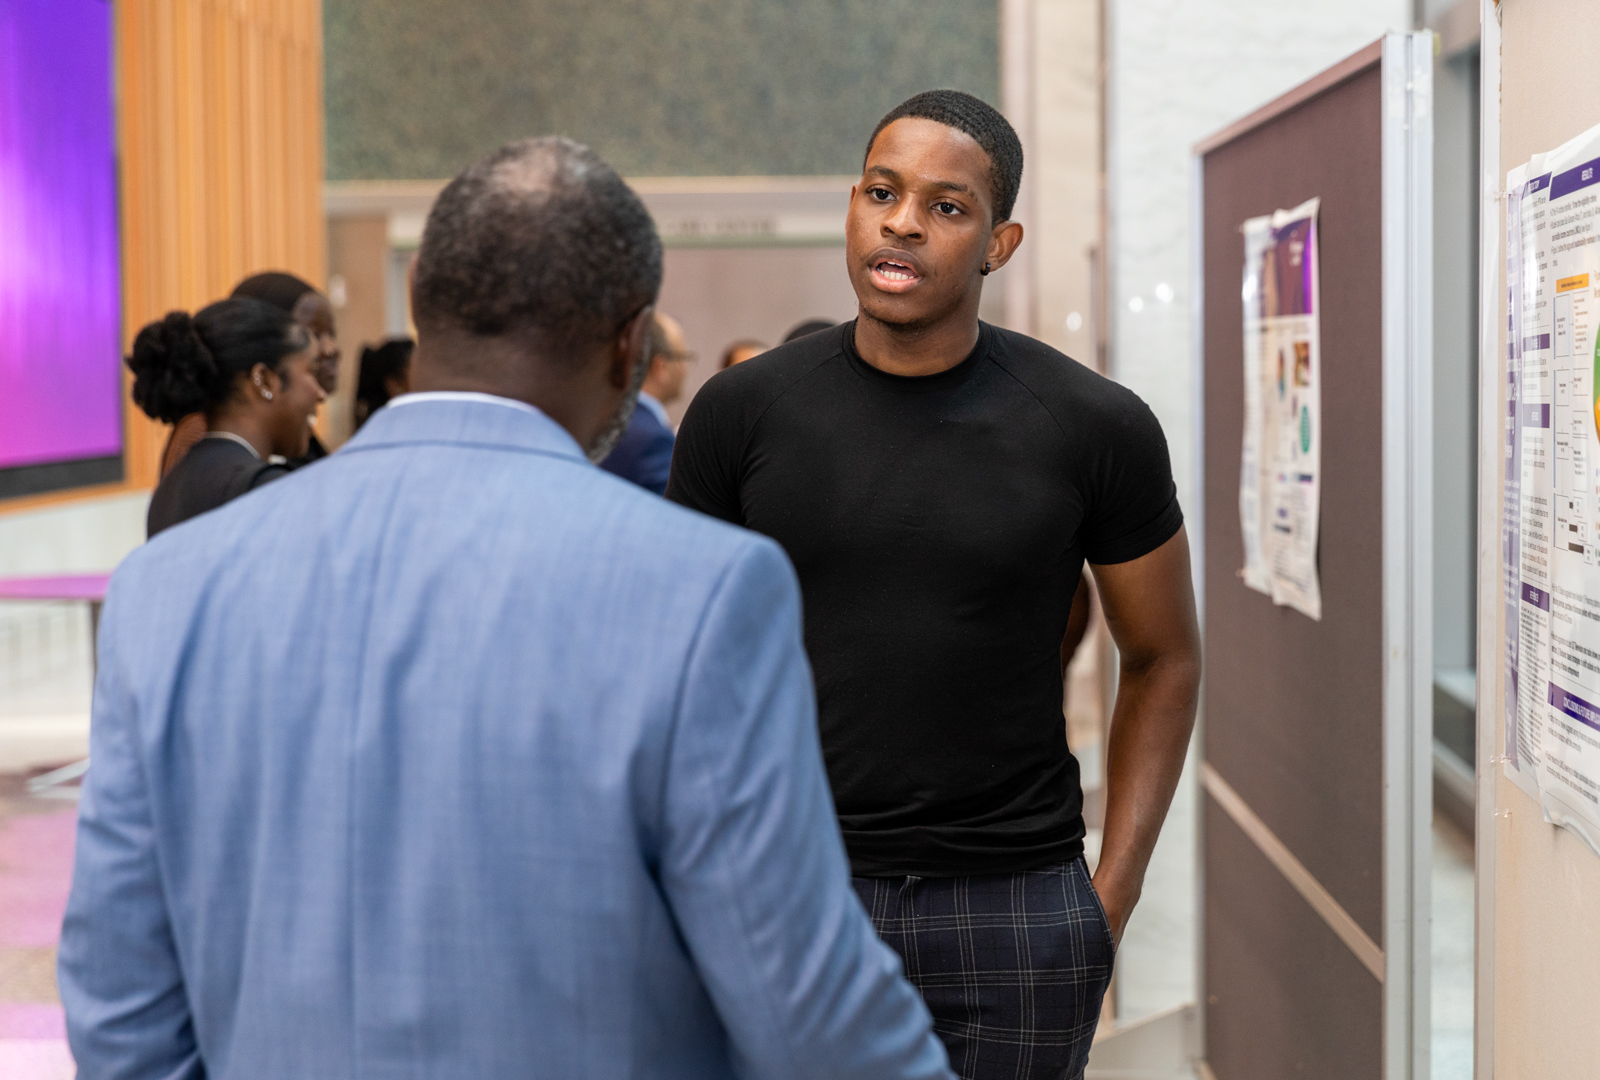 Emeryc Sogbossi speaking with event attendee about the research on their poster